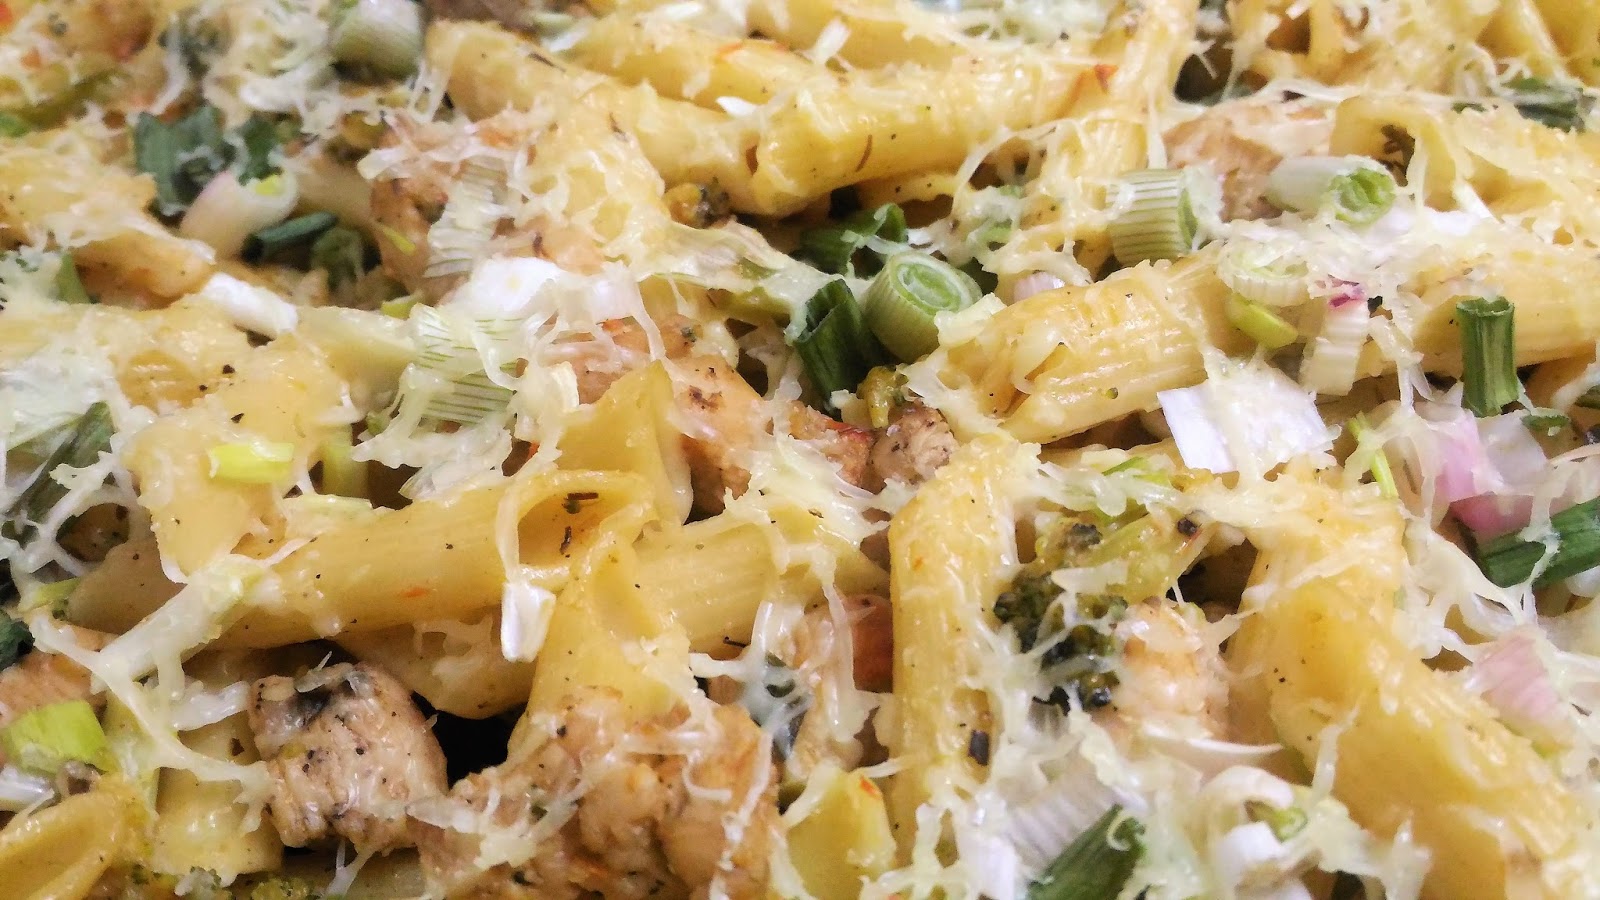 Beauty & Beyond: Easy Chicken & Broccoli Baked Penne Pasta with Go Cheese